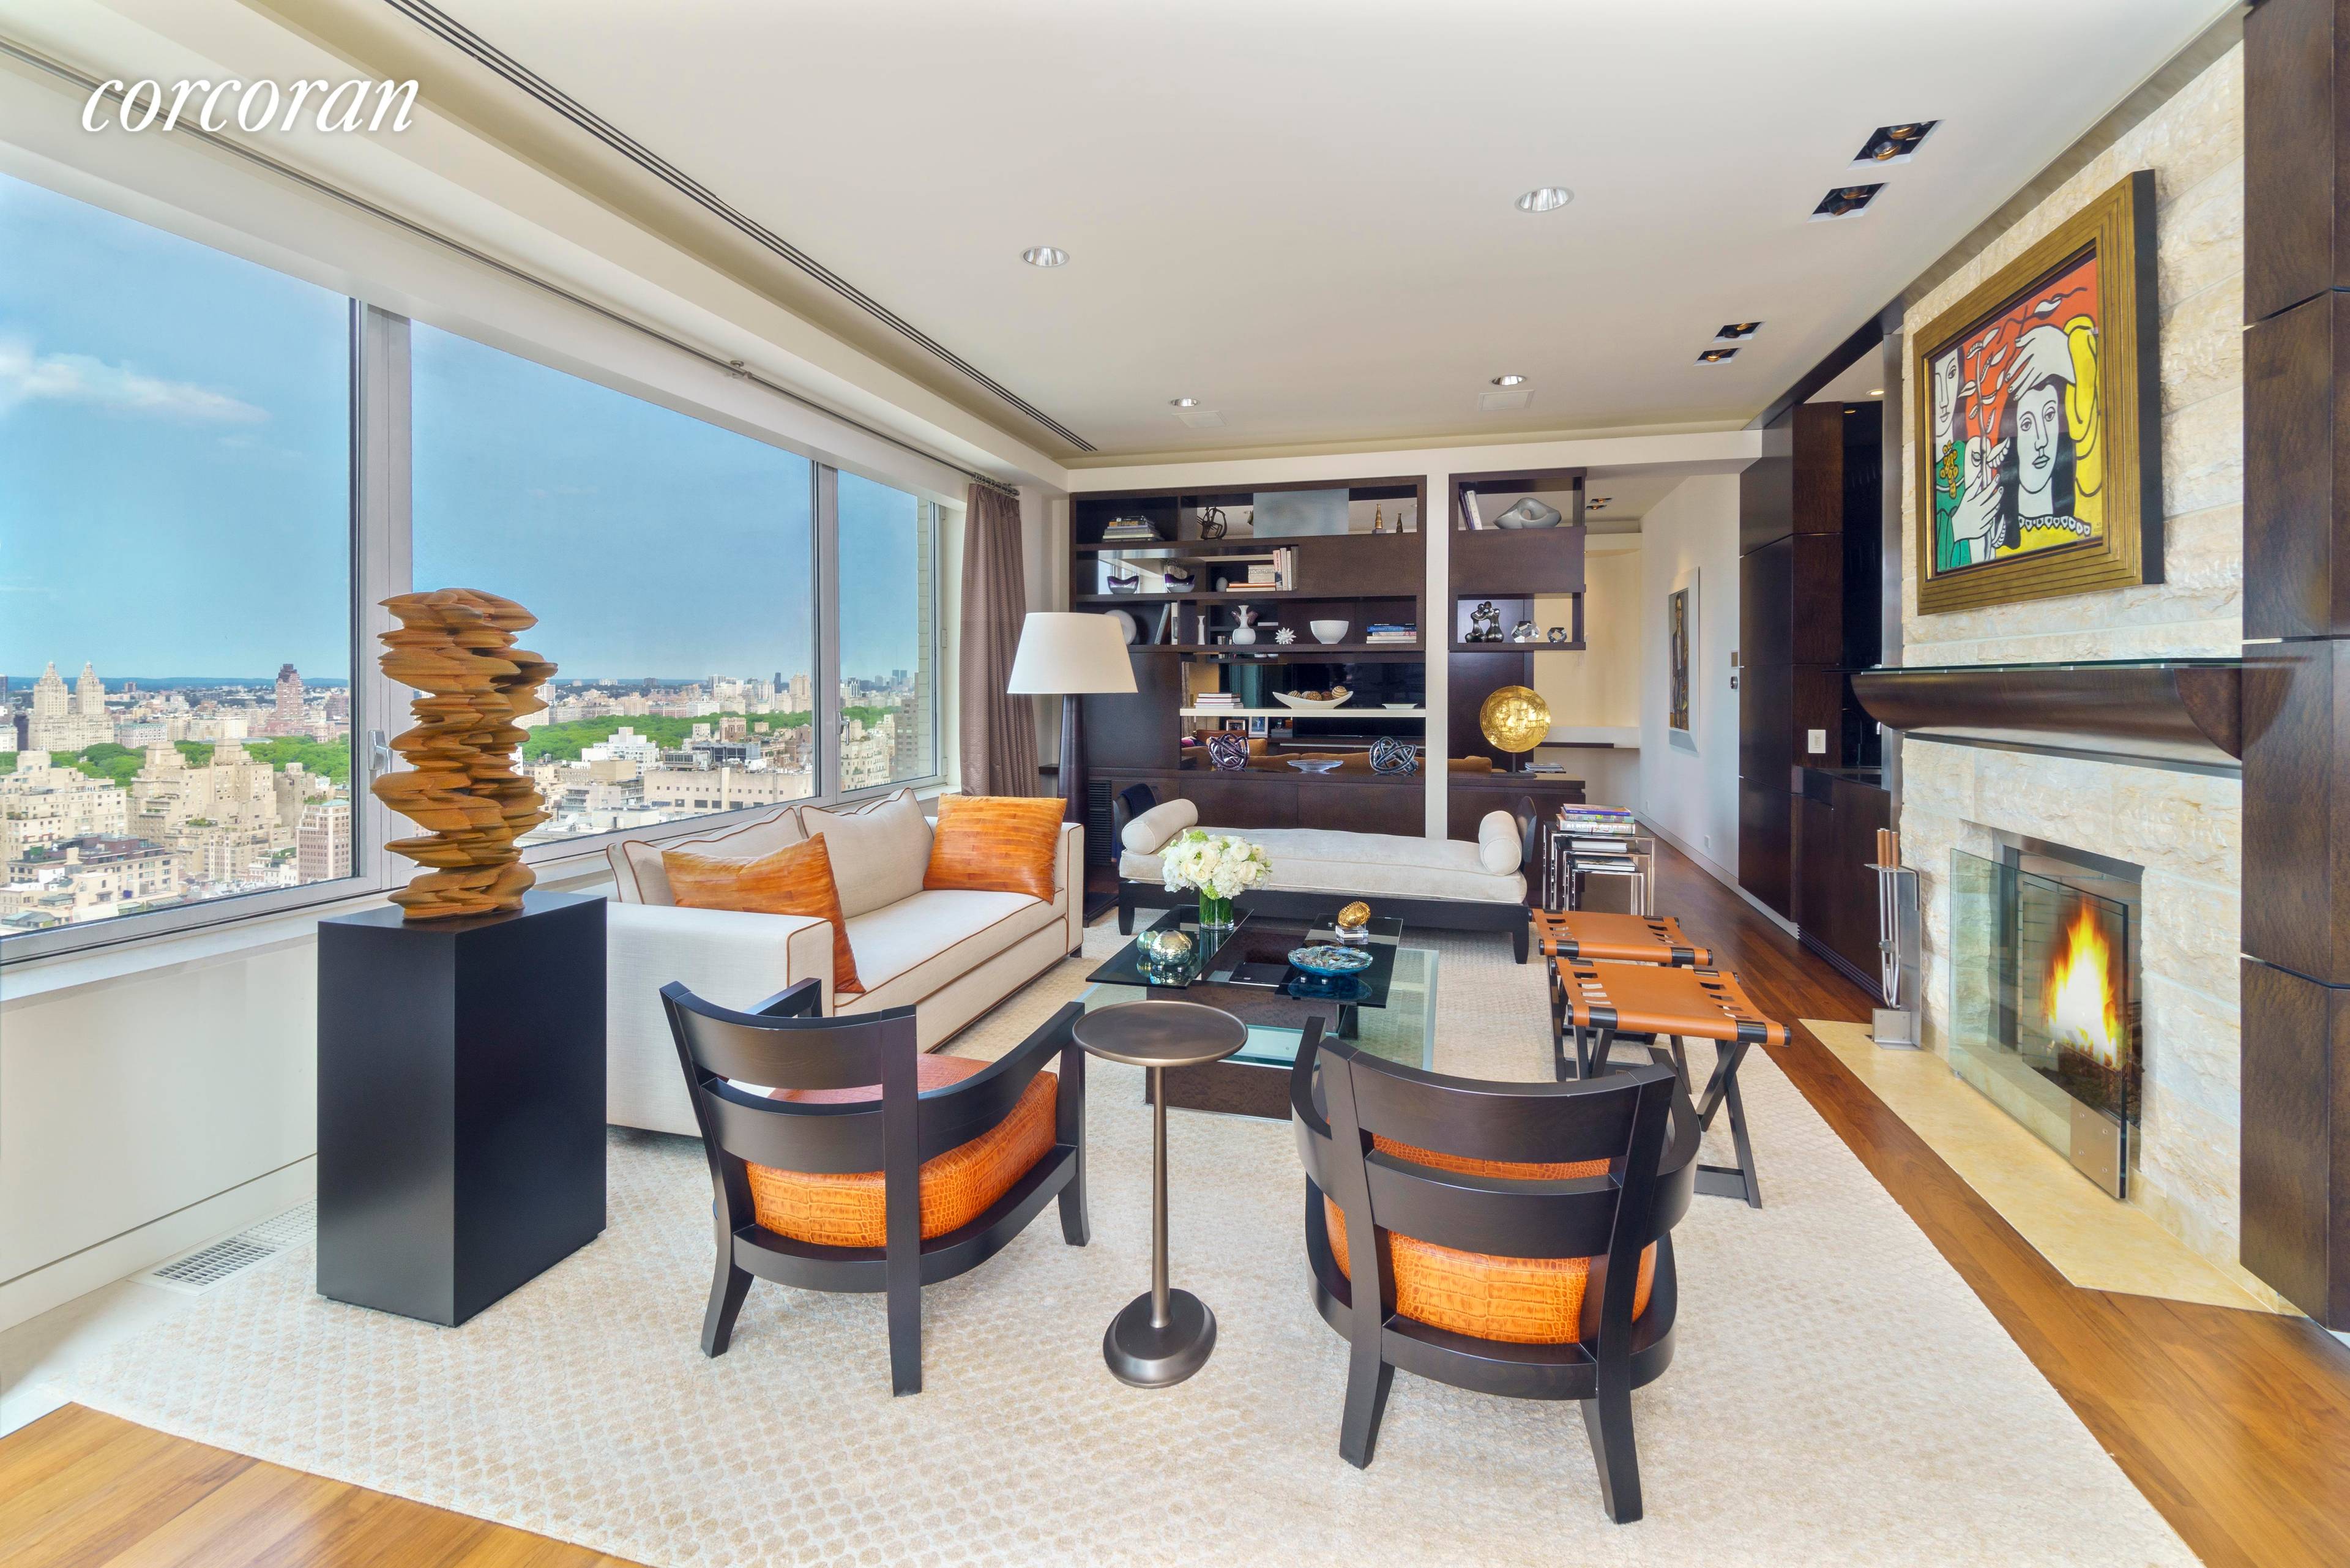 This one of a kind trophy penthouse was specifically designed for the developer of The Chatham, Robert A.